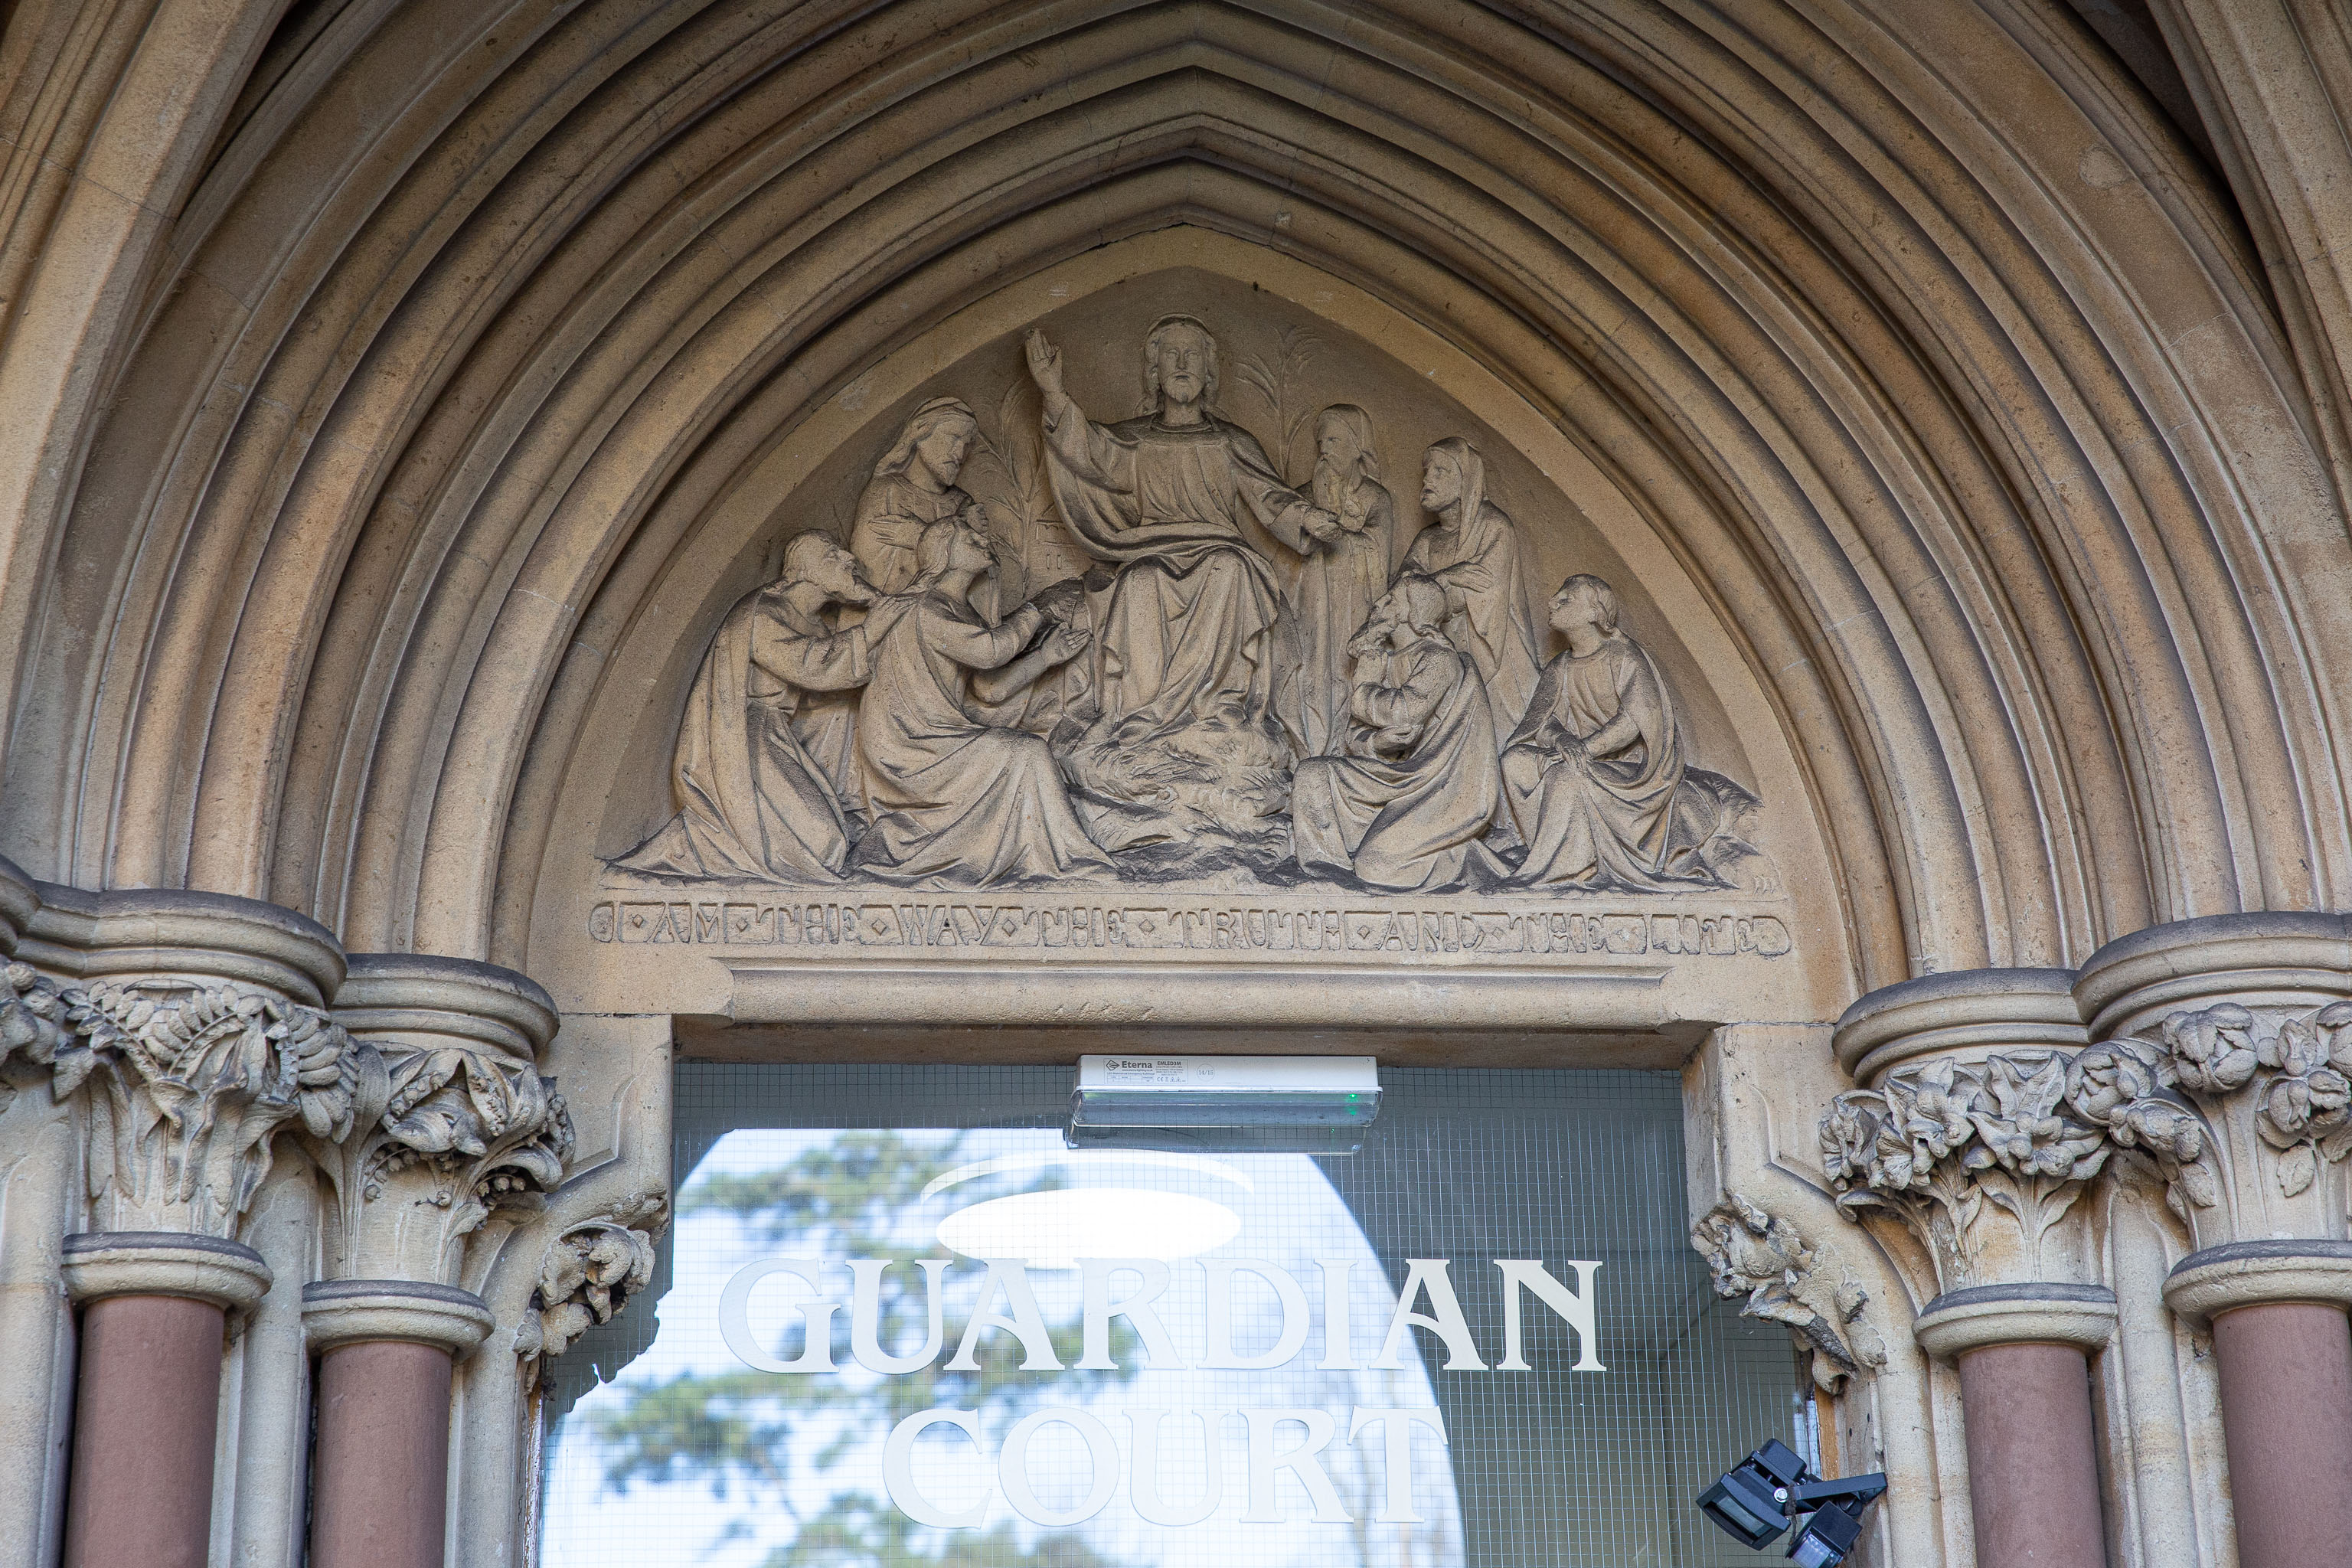 Guardian Court Tympanum
A United Reform chapel, now flats, naturellement. Christ is preaching in the tympanum
